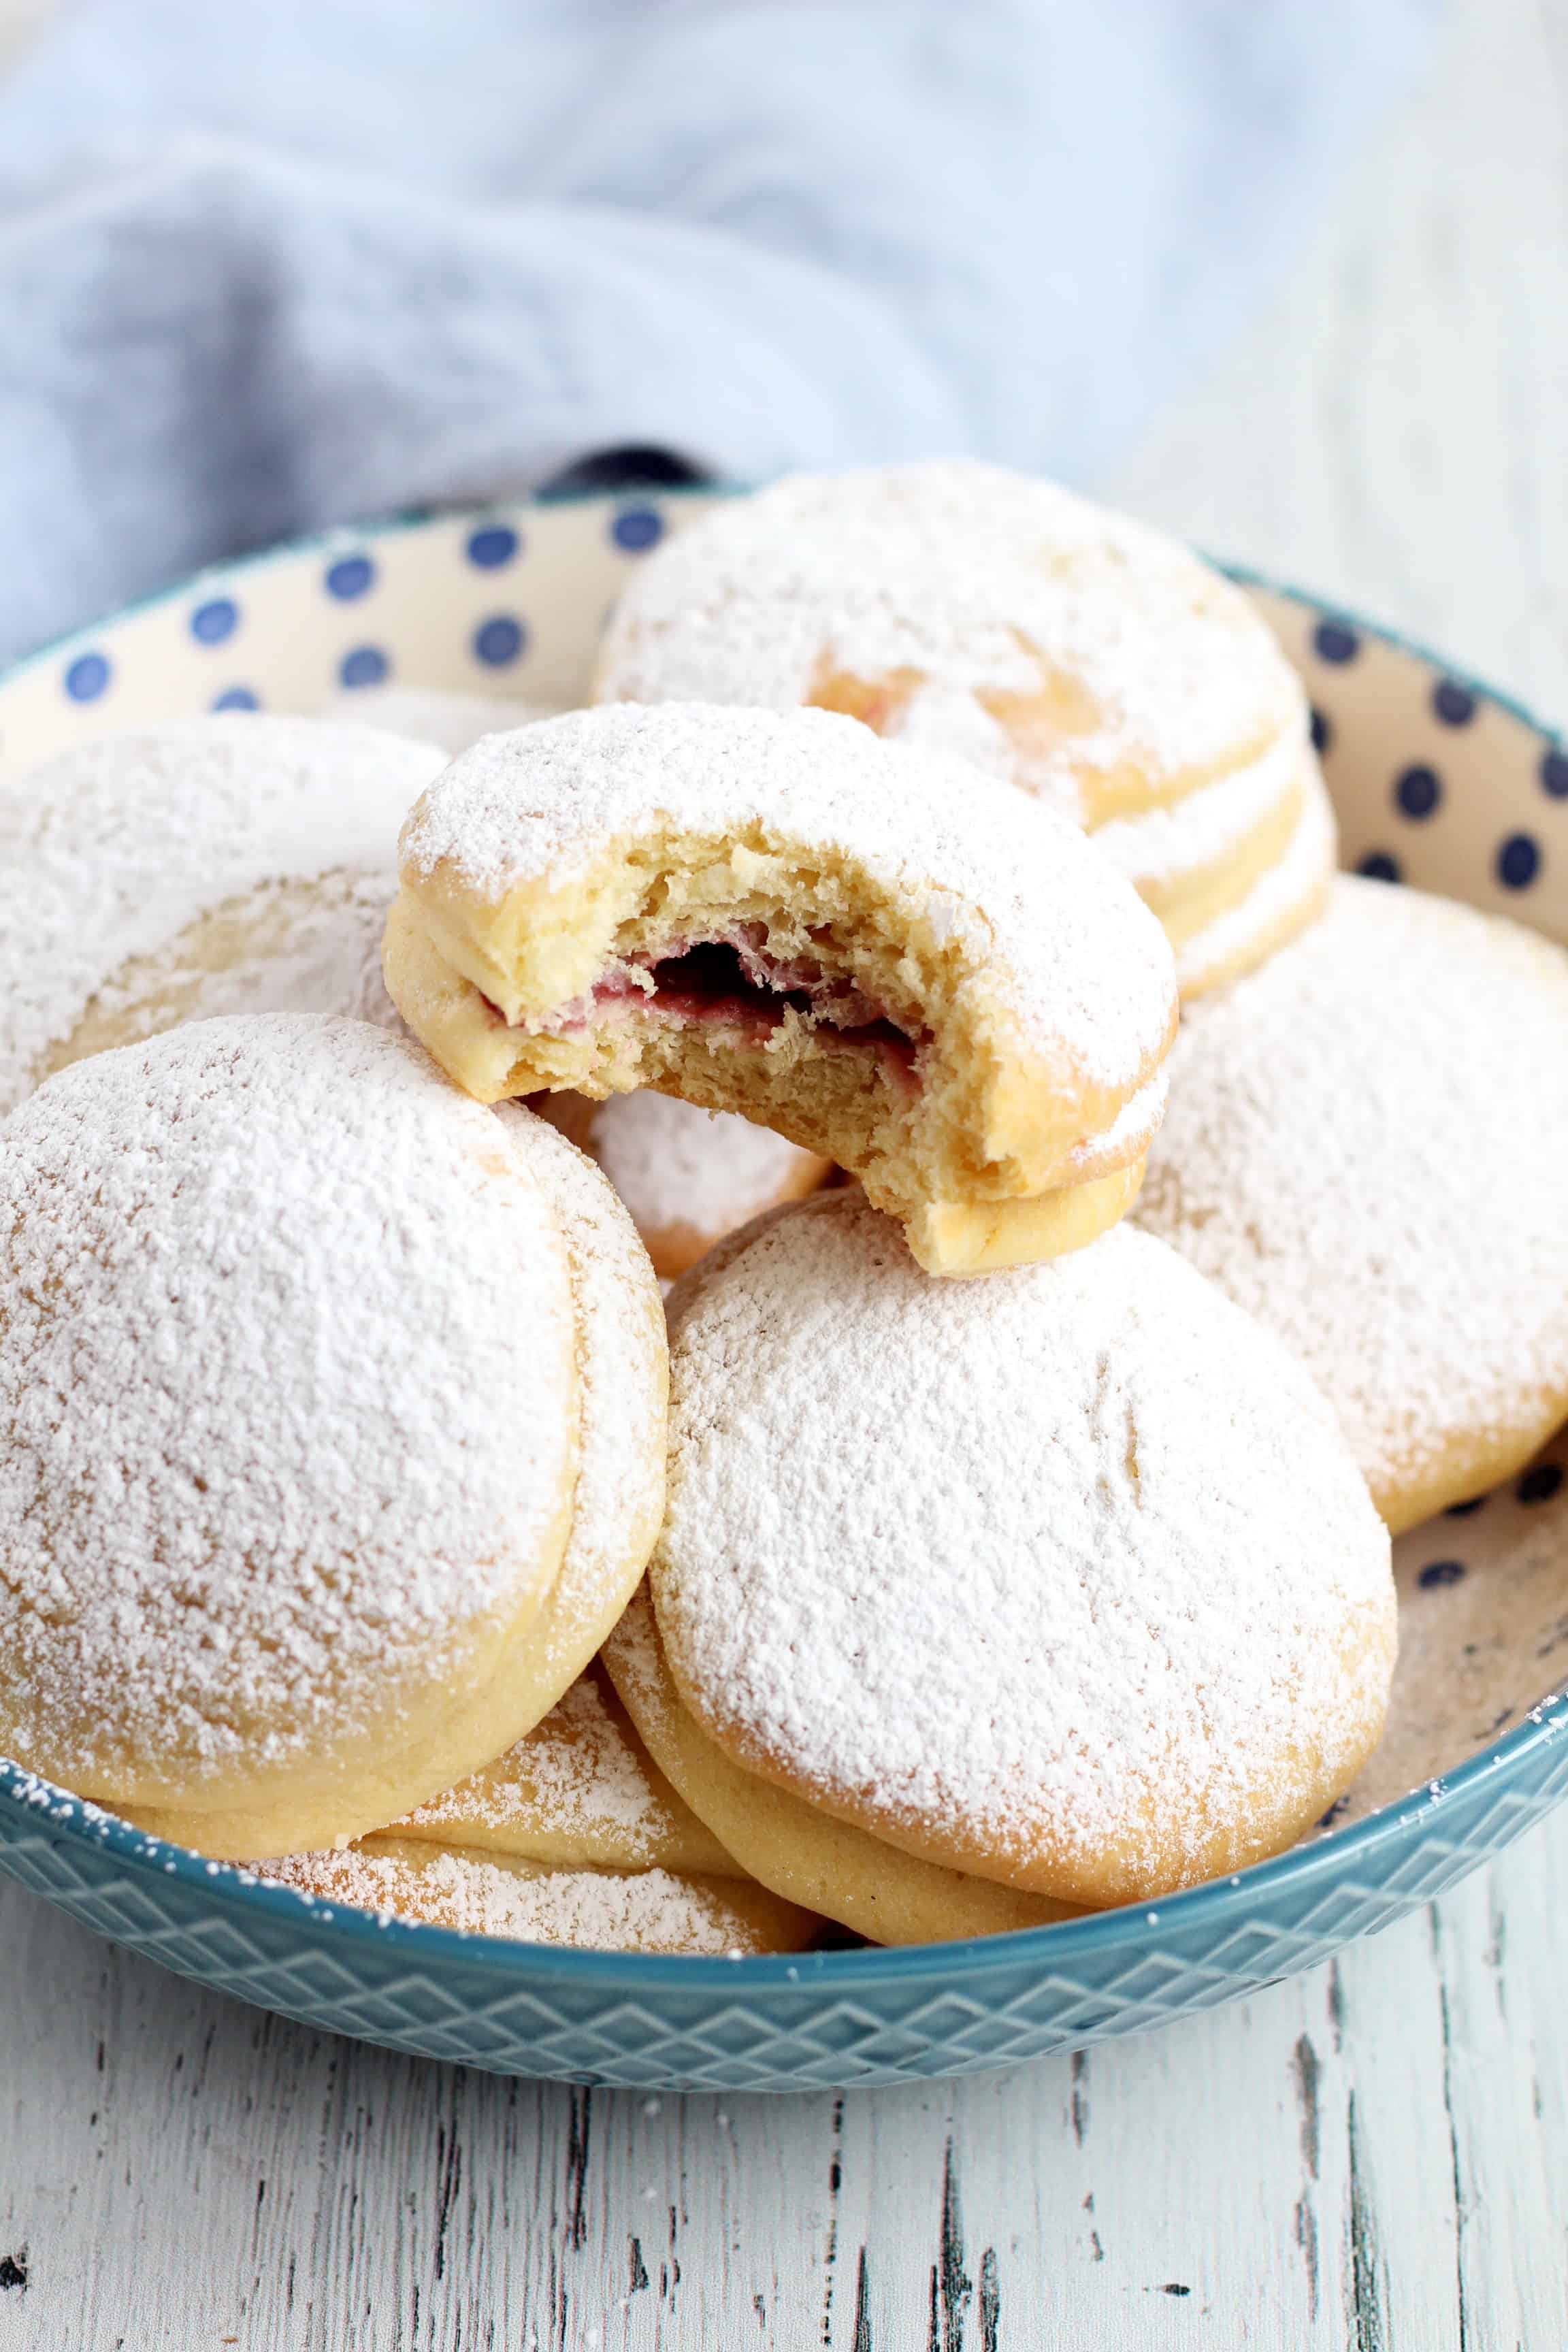 Baked donuts filled with raspberry jam